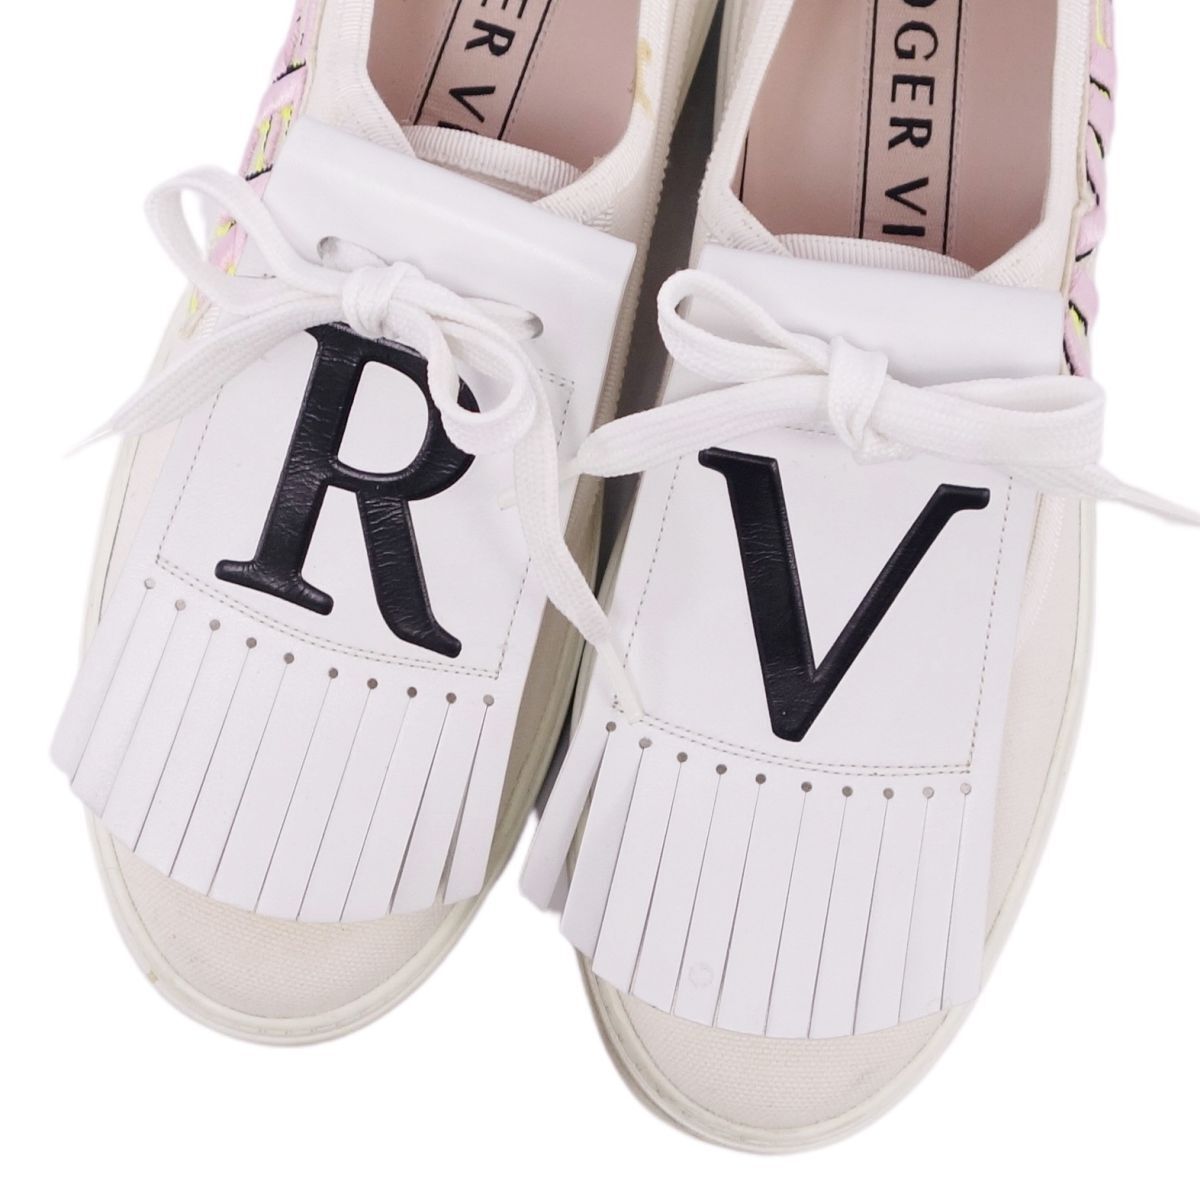 roje vi vi eRoger Vivier sneakers low cut race up canvas leather shoes lady's 37.5 white cf04or-rm05f09665